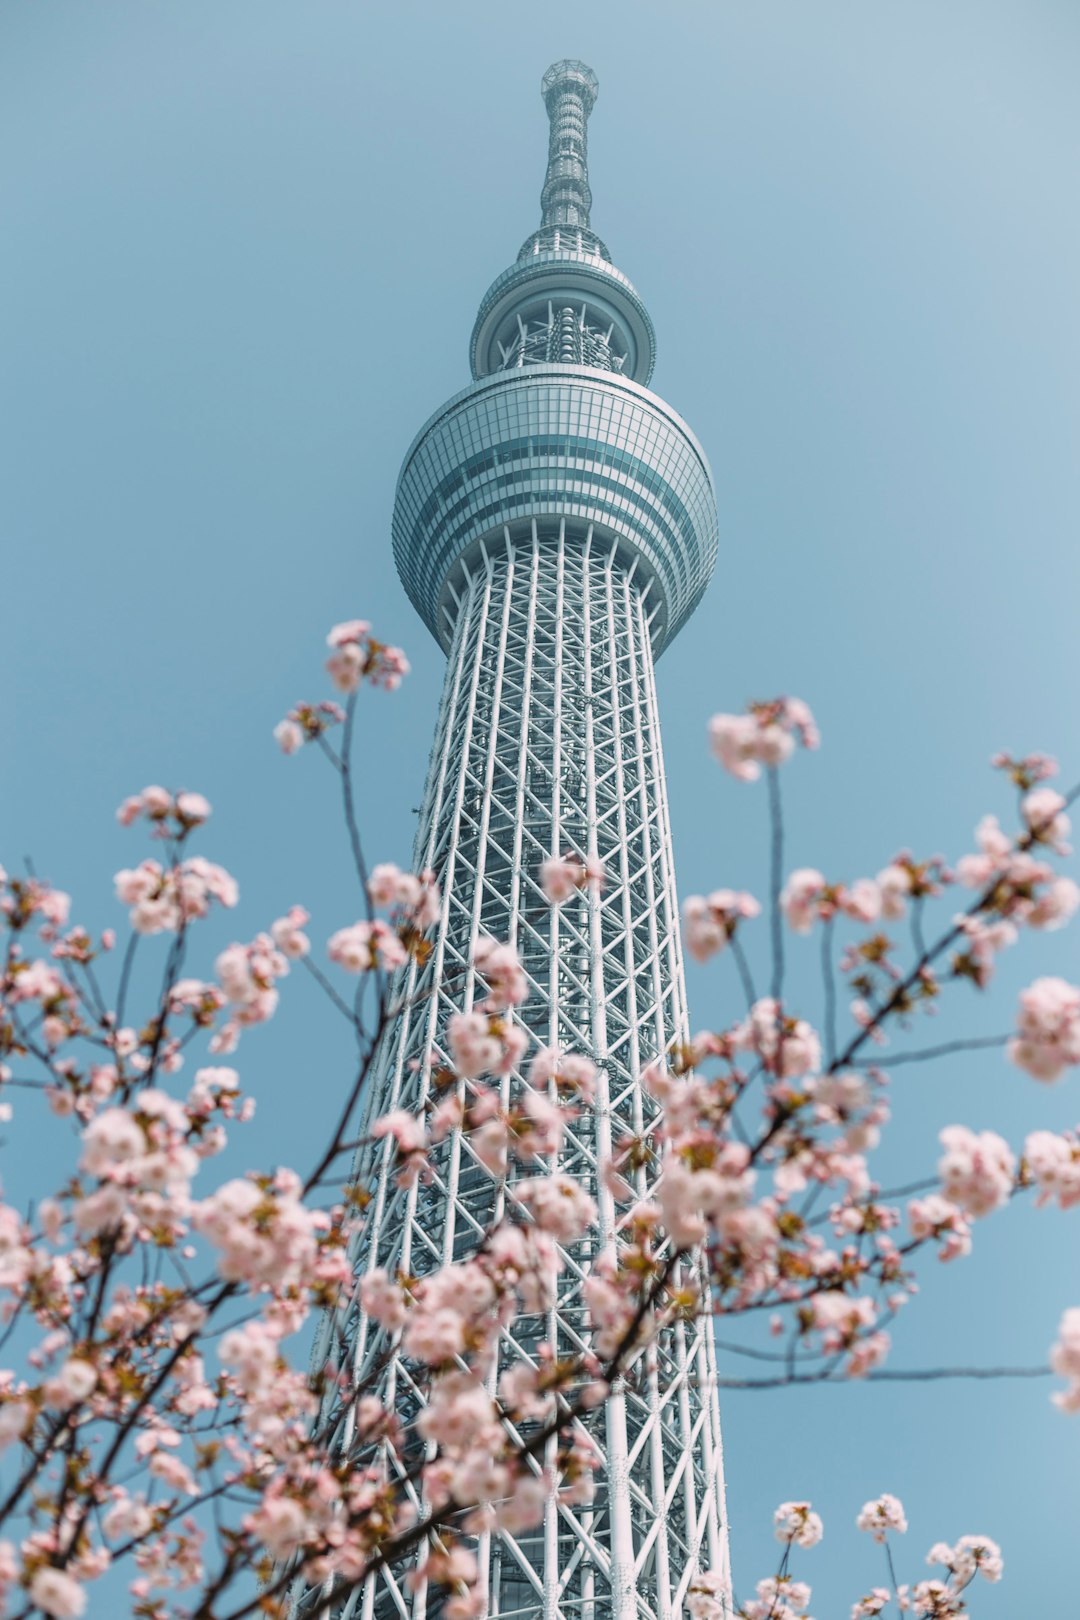 Travel Tips and Stories of Tokyo Skytree Station in Japan